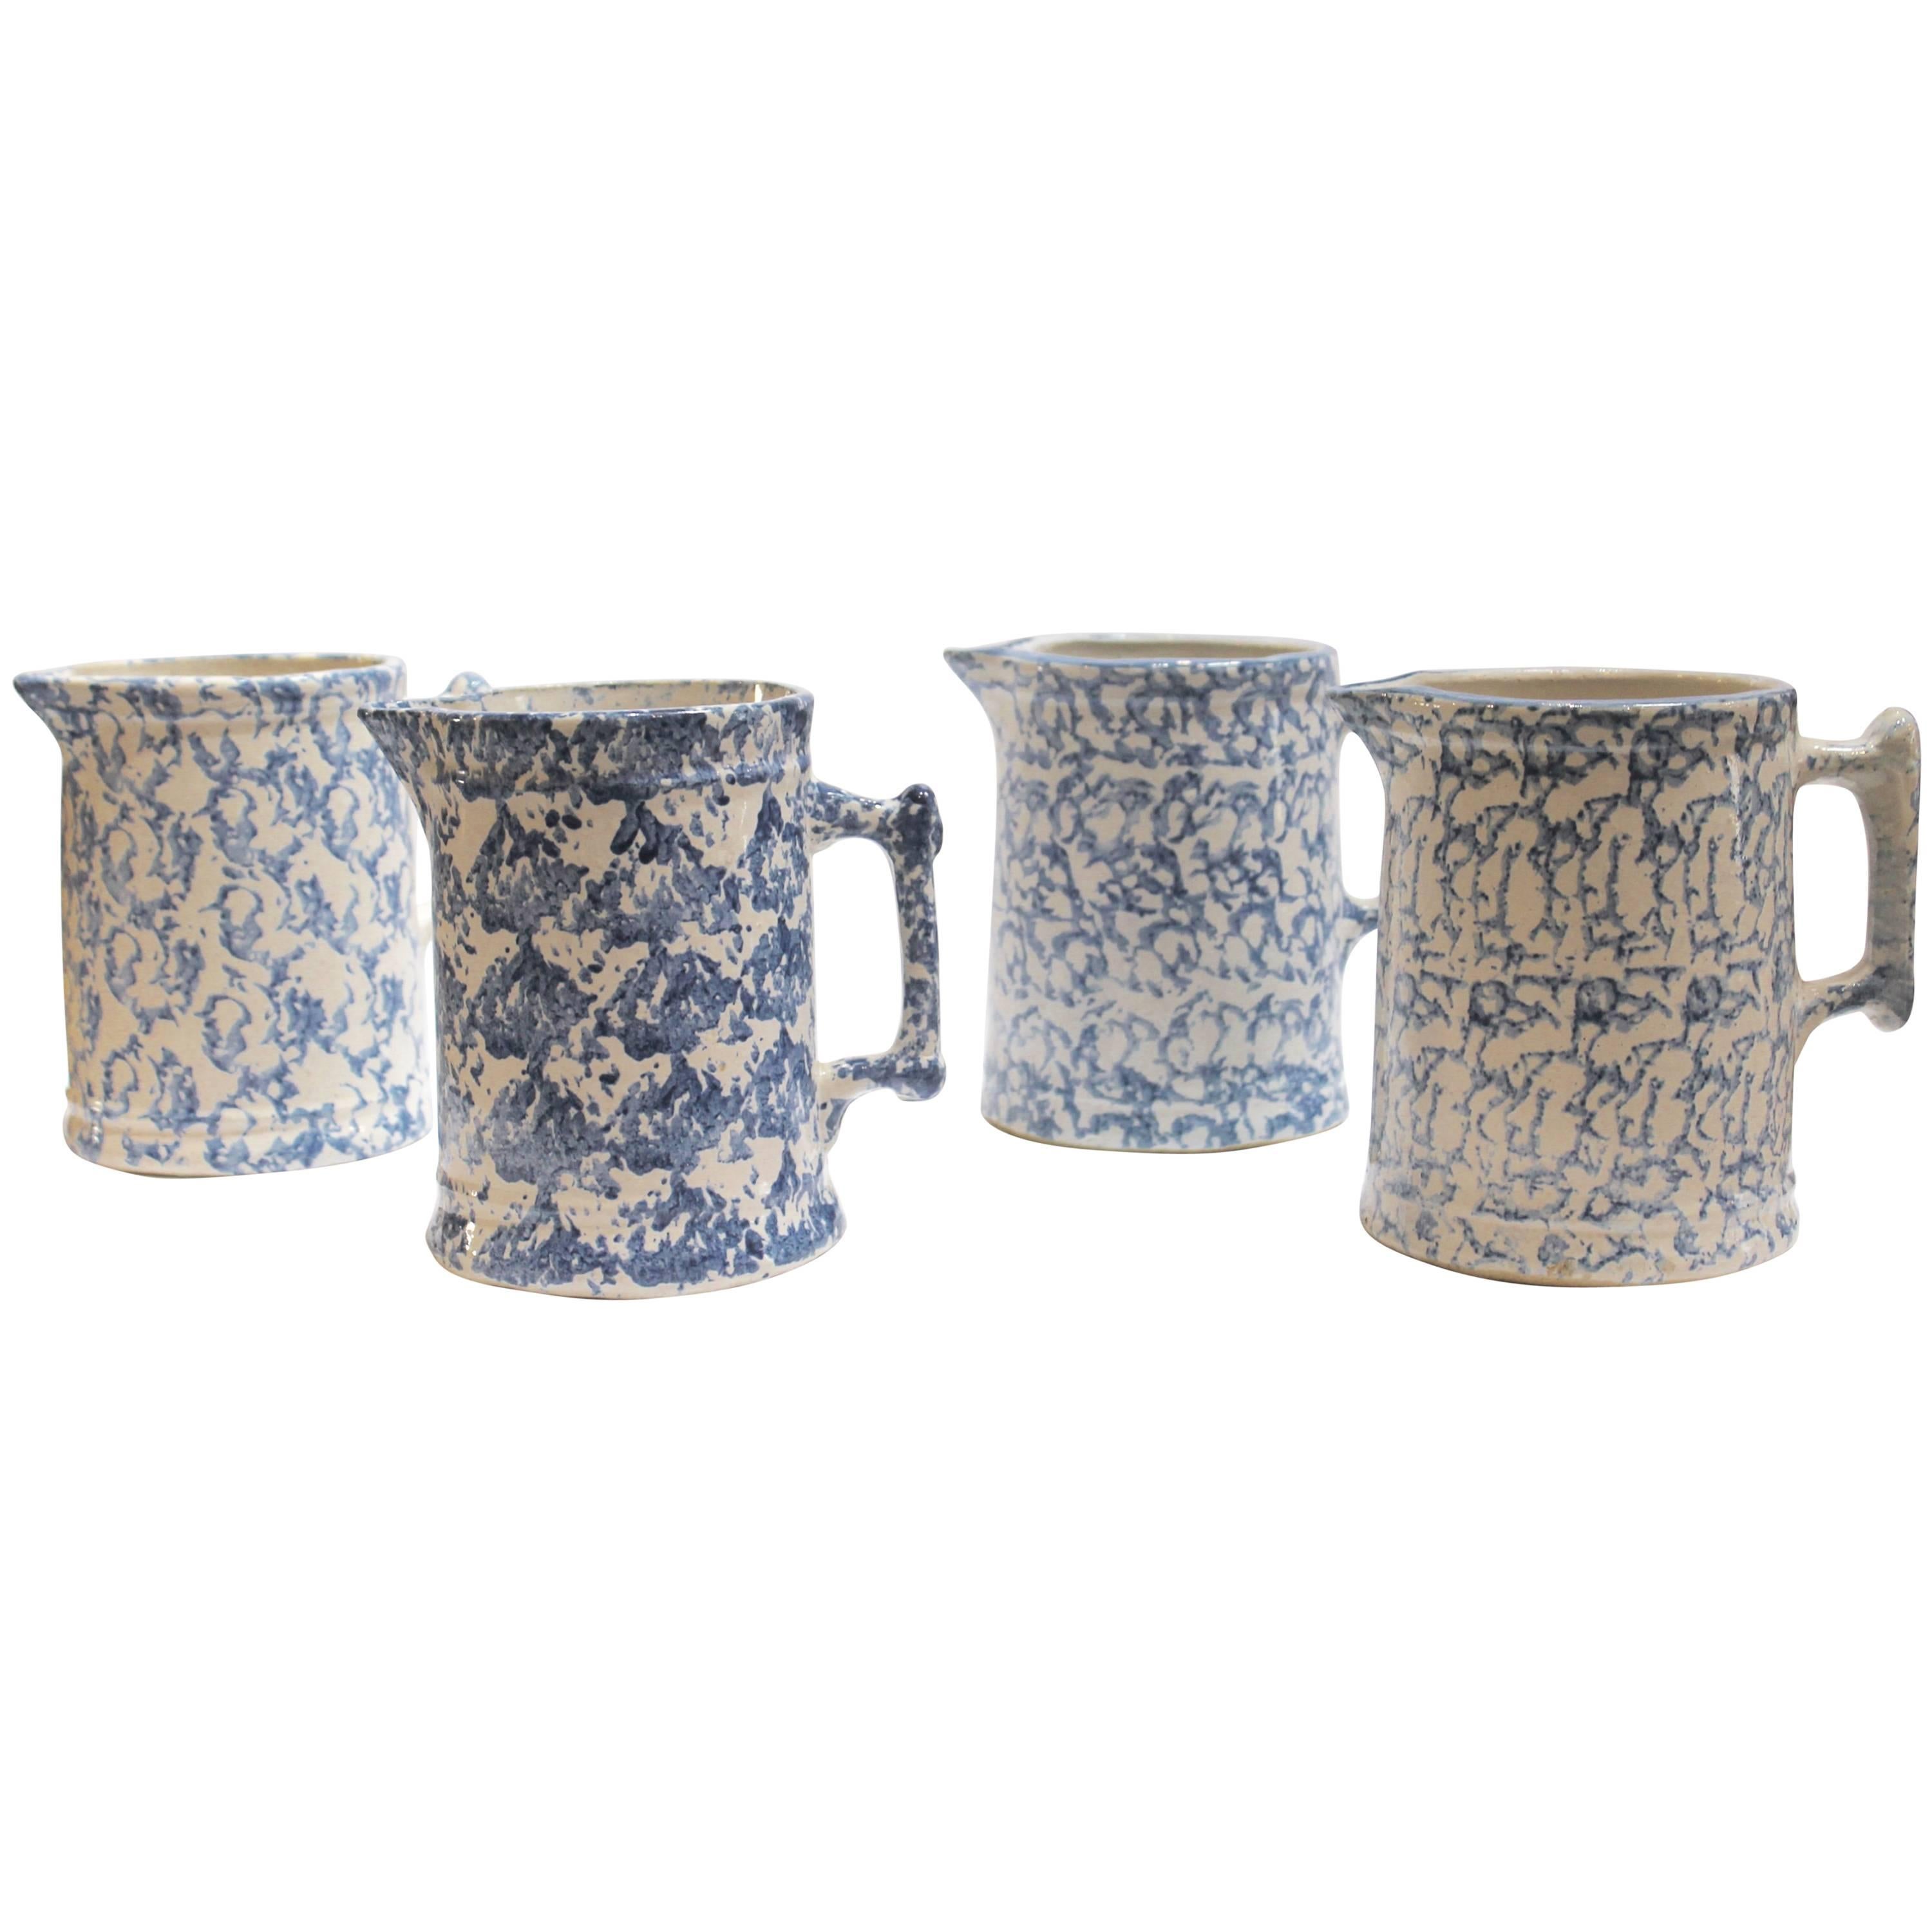 Fantastic Collection of Four 19th Century Sponge Ware Water Pitchers  